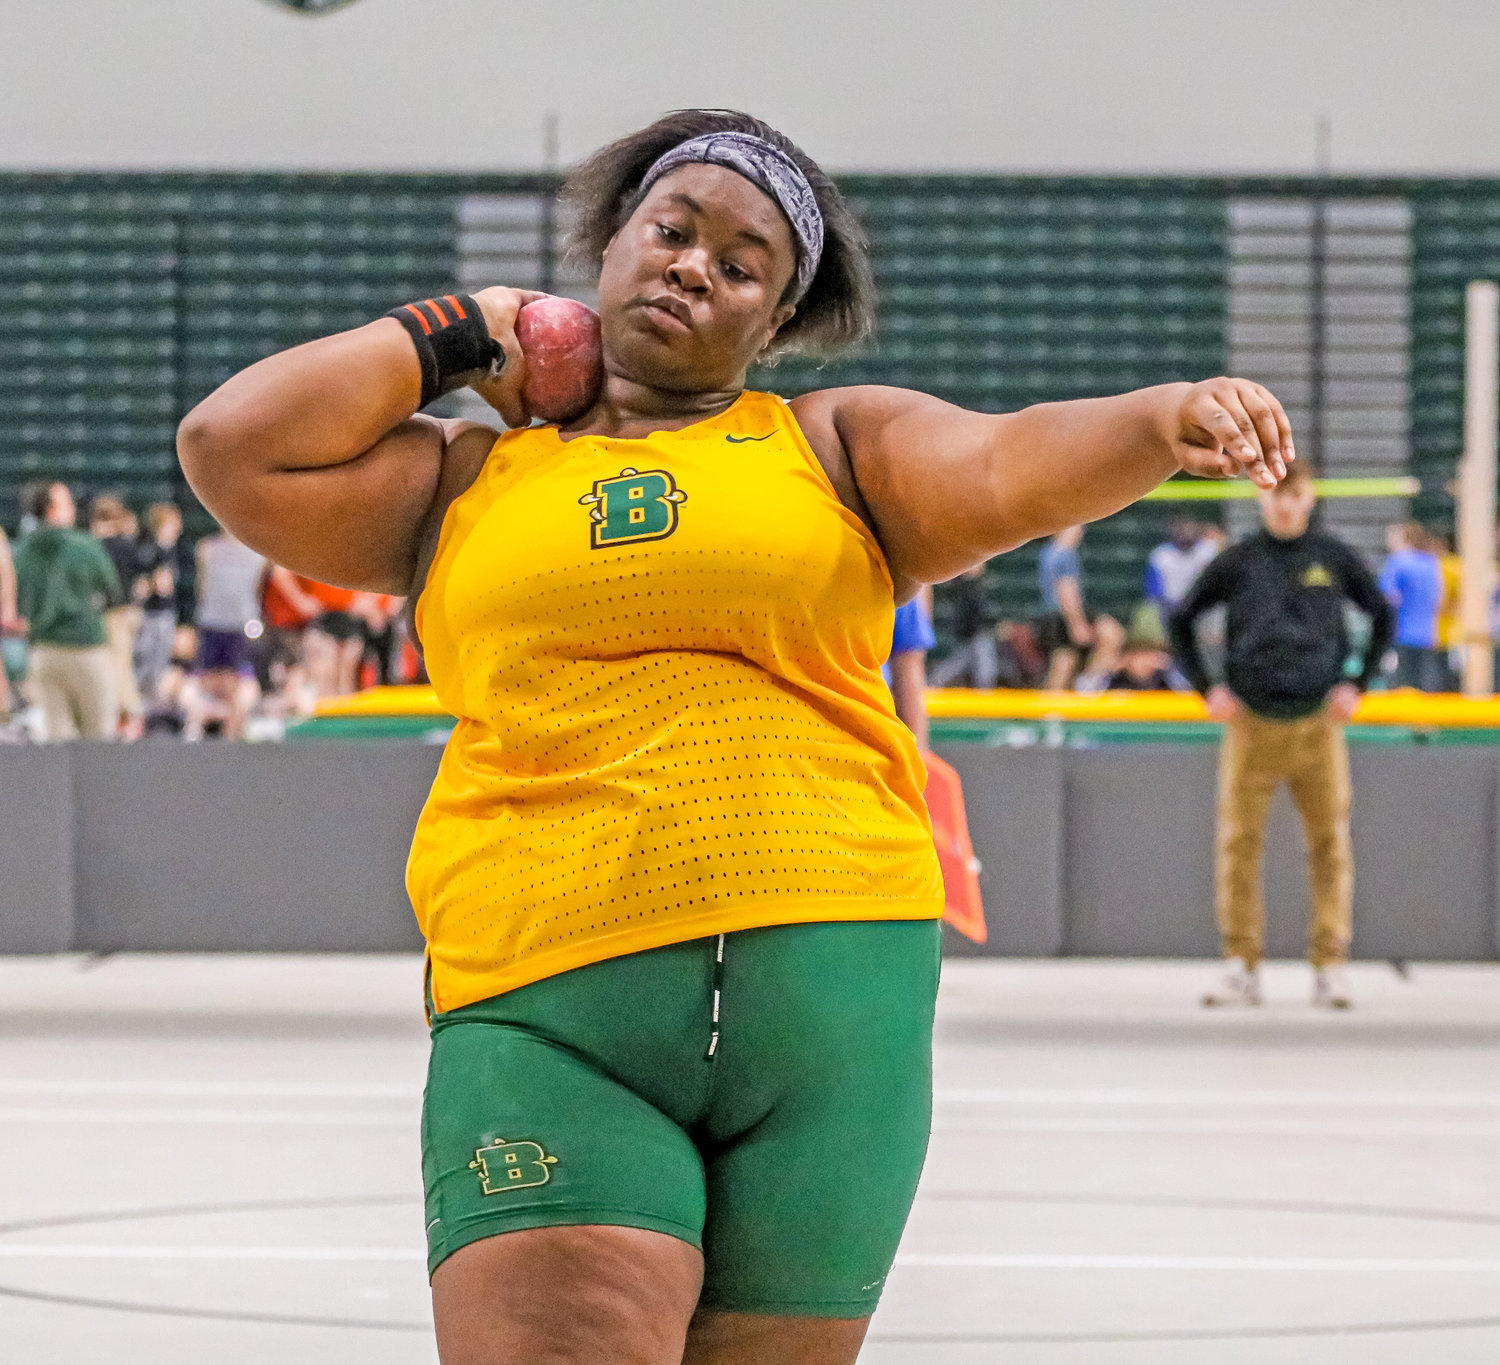 Sarah Crockett captured a third consecutive shot put title with a toss of 43 feet, 9 ¼ inches and the junior also repeated in the women’s weight throw with a winning heave of 56-4 ½ as host SUNY Brockport placed second in the State University of New York Athletic Conference (SUNYAC) Women’s Track &amp; Field Championships.